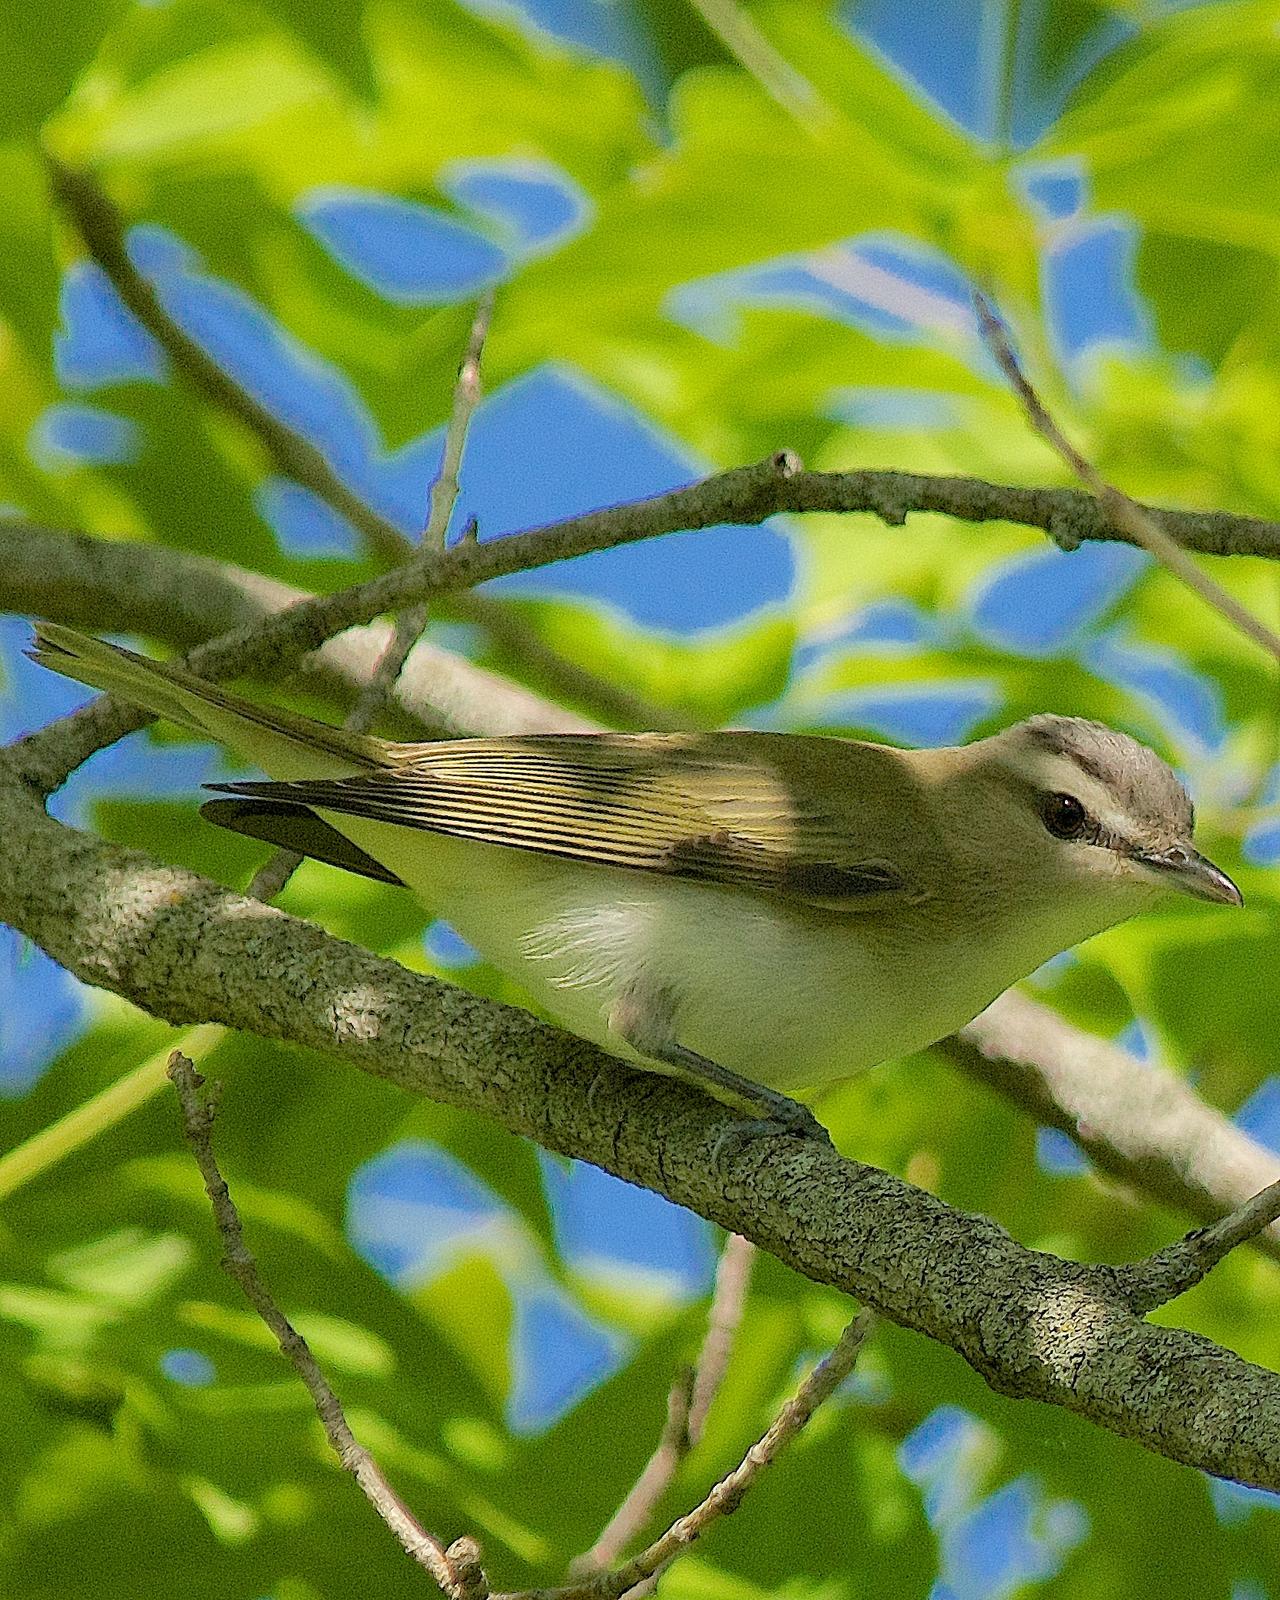 Red-eyed/Chivi Vireo Photo by Gerald Hoekstra